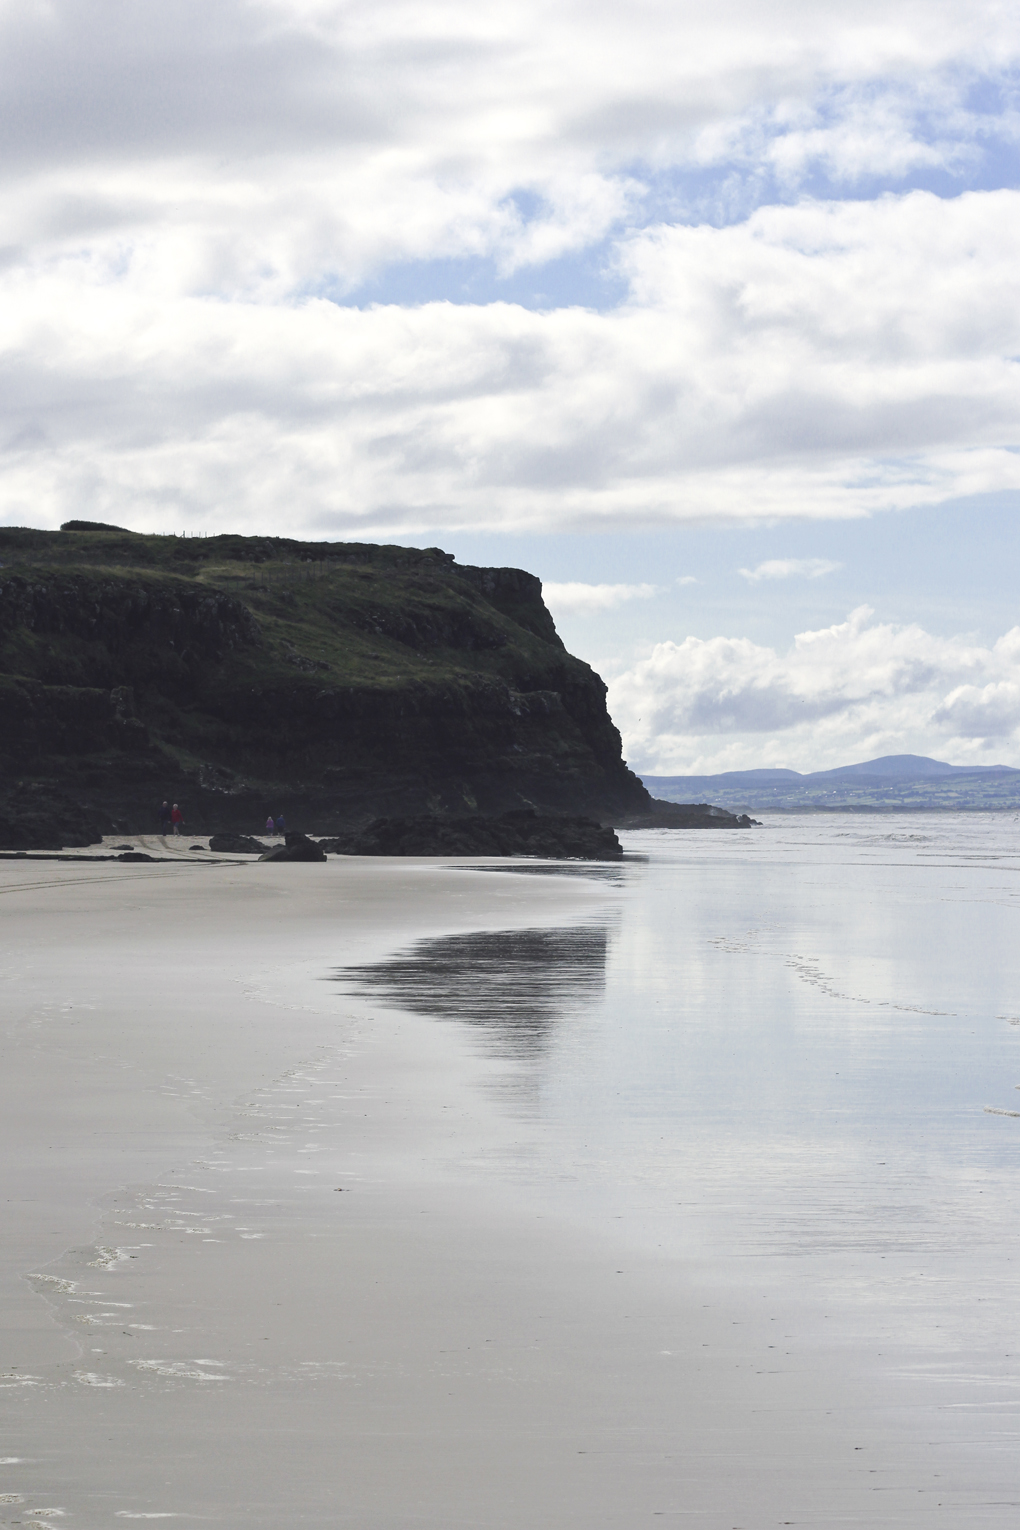 Portrait shot of the Castlerock beach looking over towards Donegal.